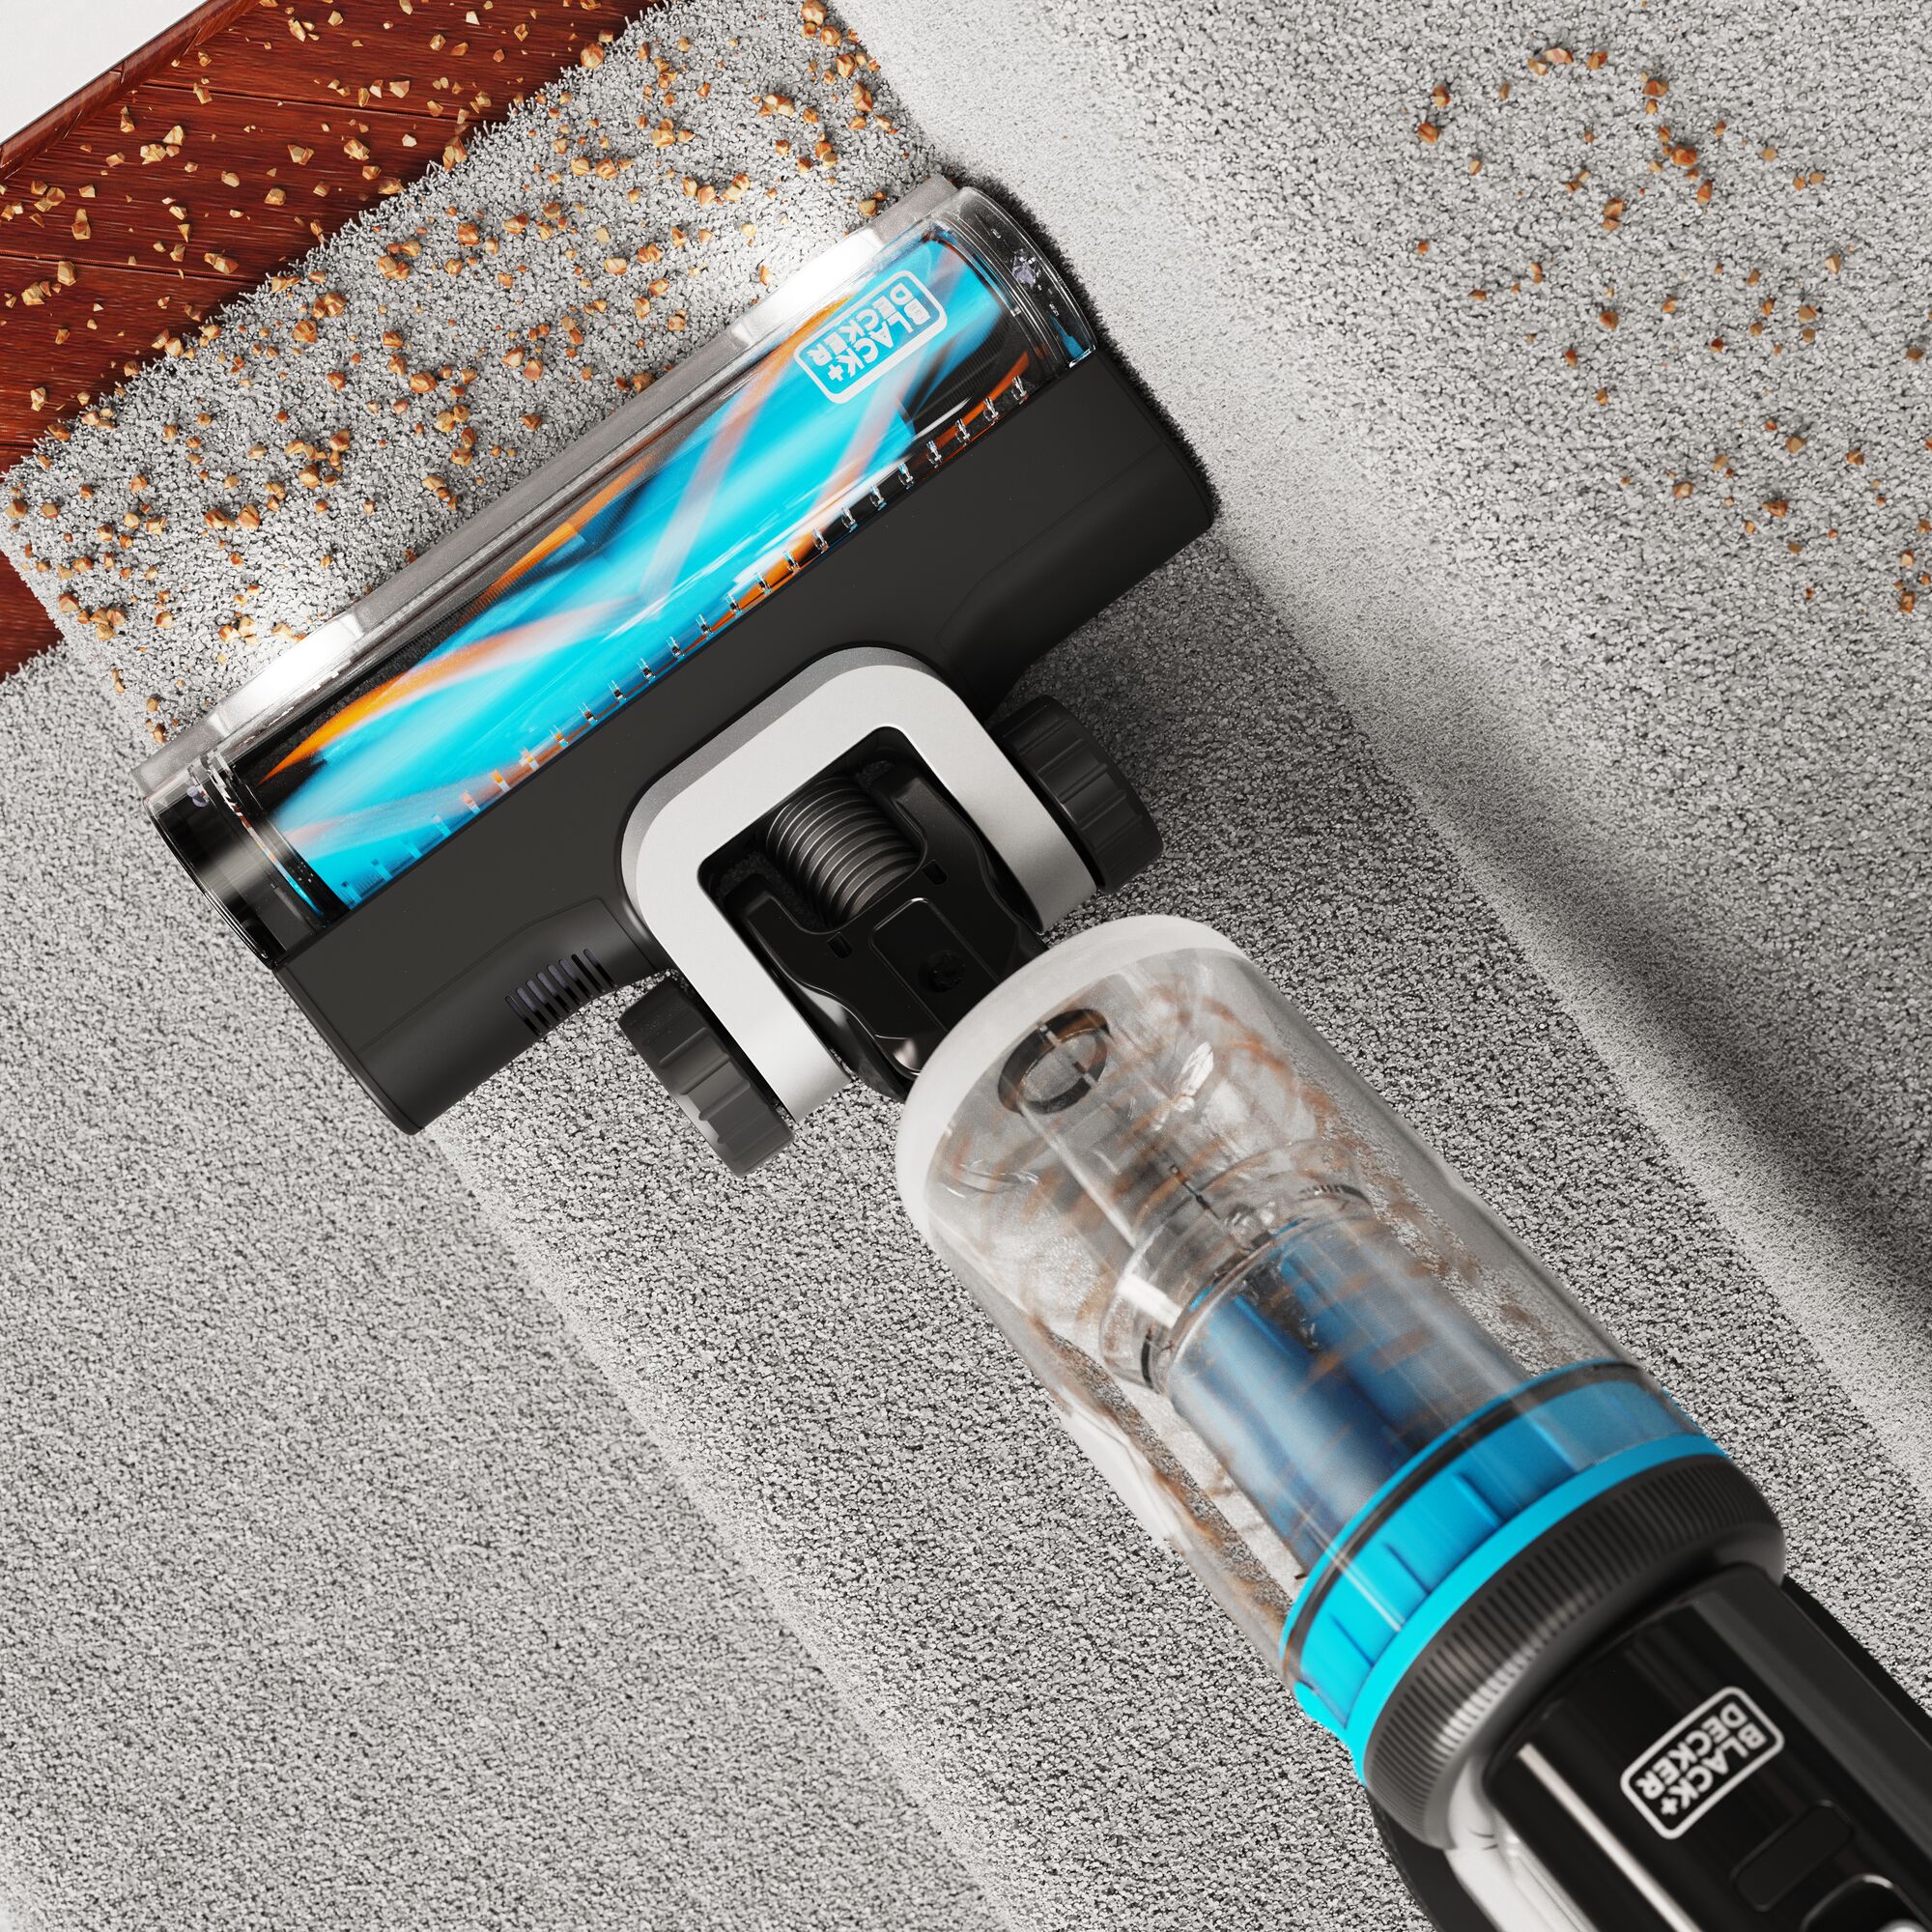 BLACK+DECKER POWERSERIES Extreme MAX Cordless Stick Vac in stair mode cleaning dirt of a stair